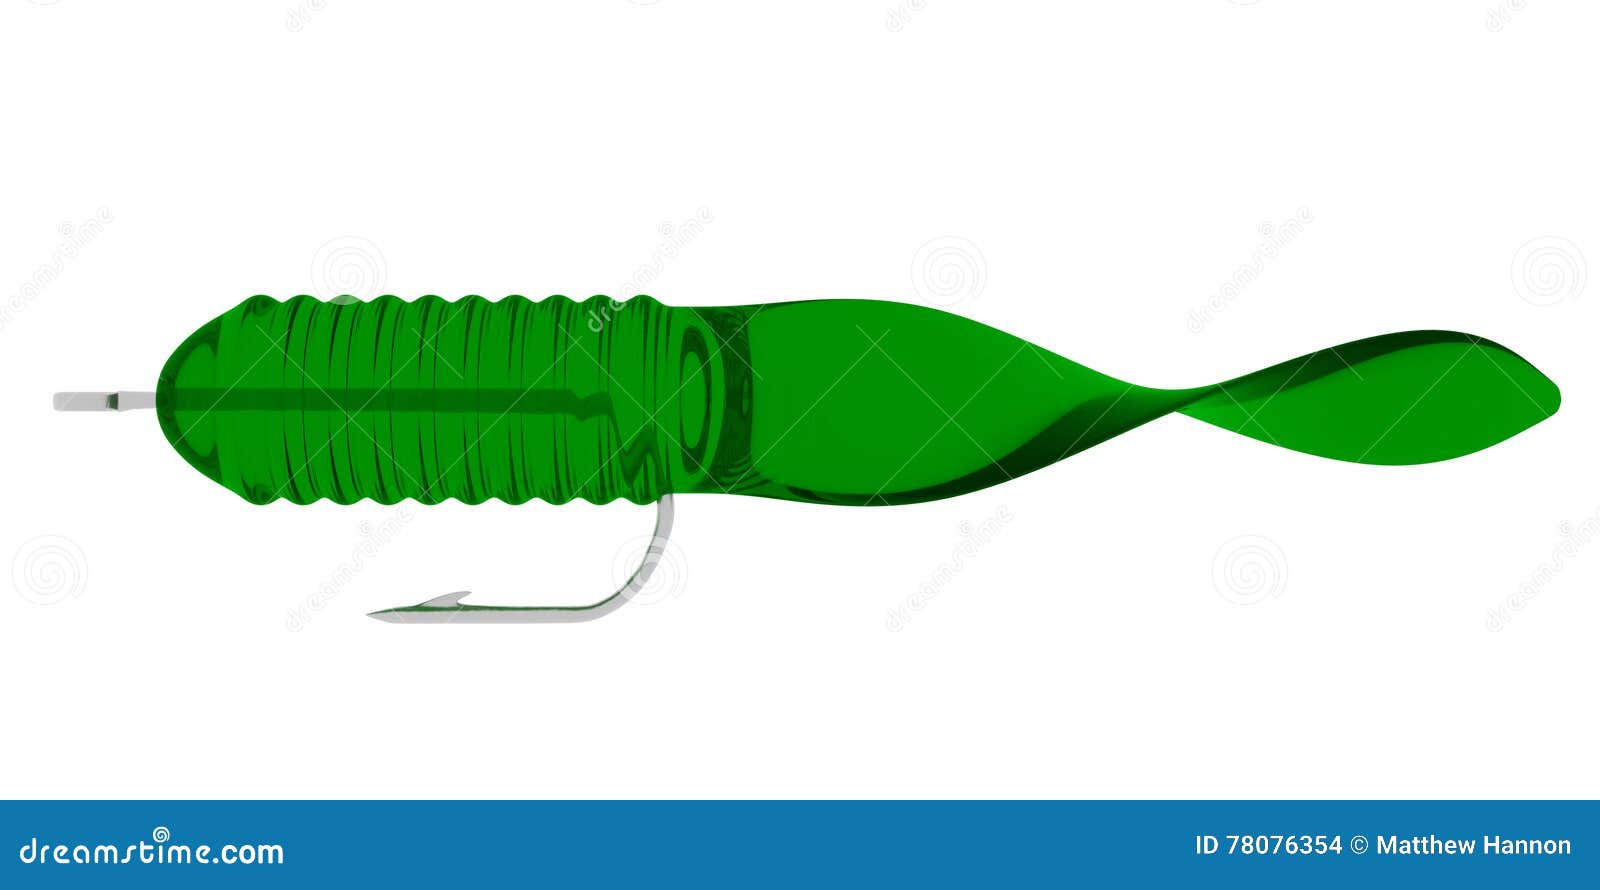 Transparent Green Grub Lure with a Hook in it. Stock Illustration